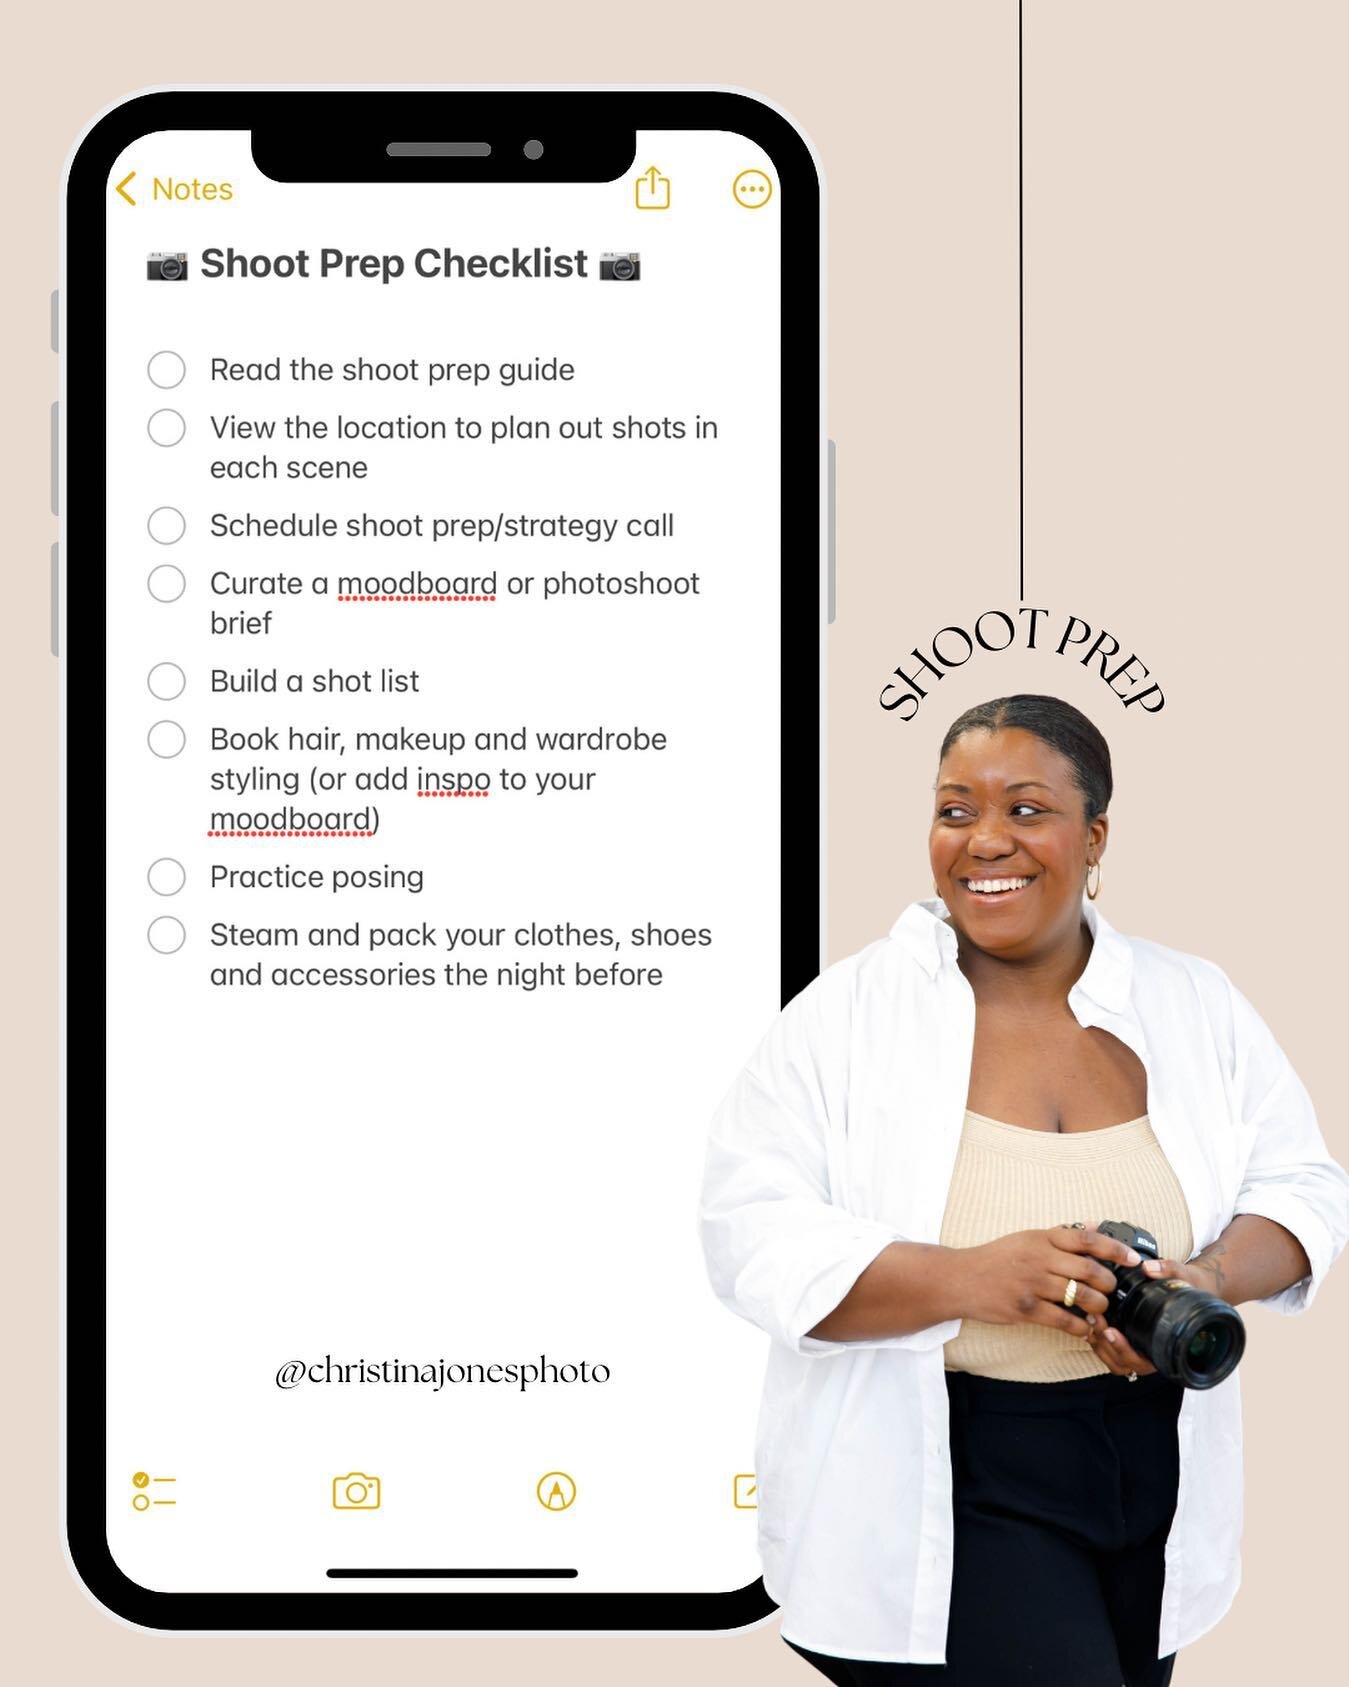 The key to a successful brand shoot? 

How well you prep!

If you follow these 👆🏾steps, and collaborate with your photographer/videographer along the way, you&rsquo;ll love the results so much better than leaving it all up to chance!

Photography i